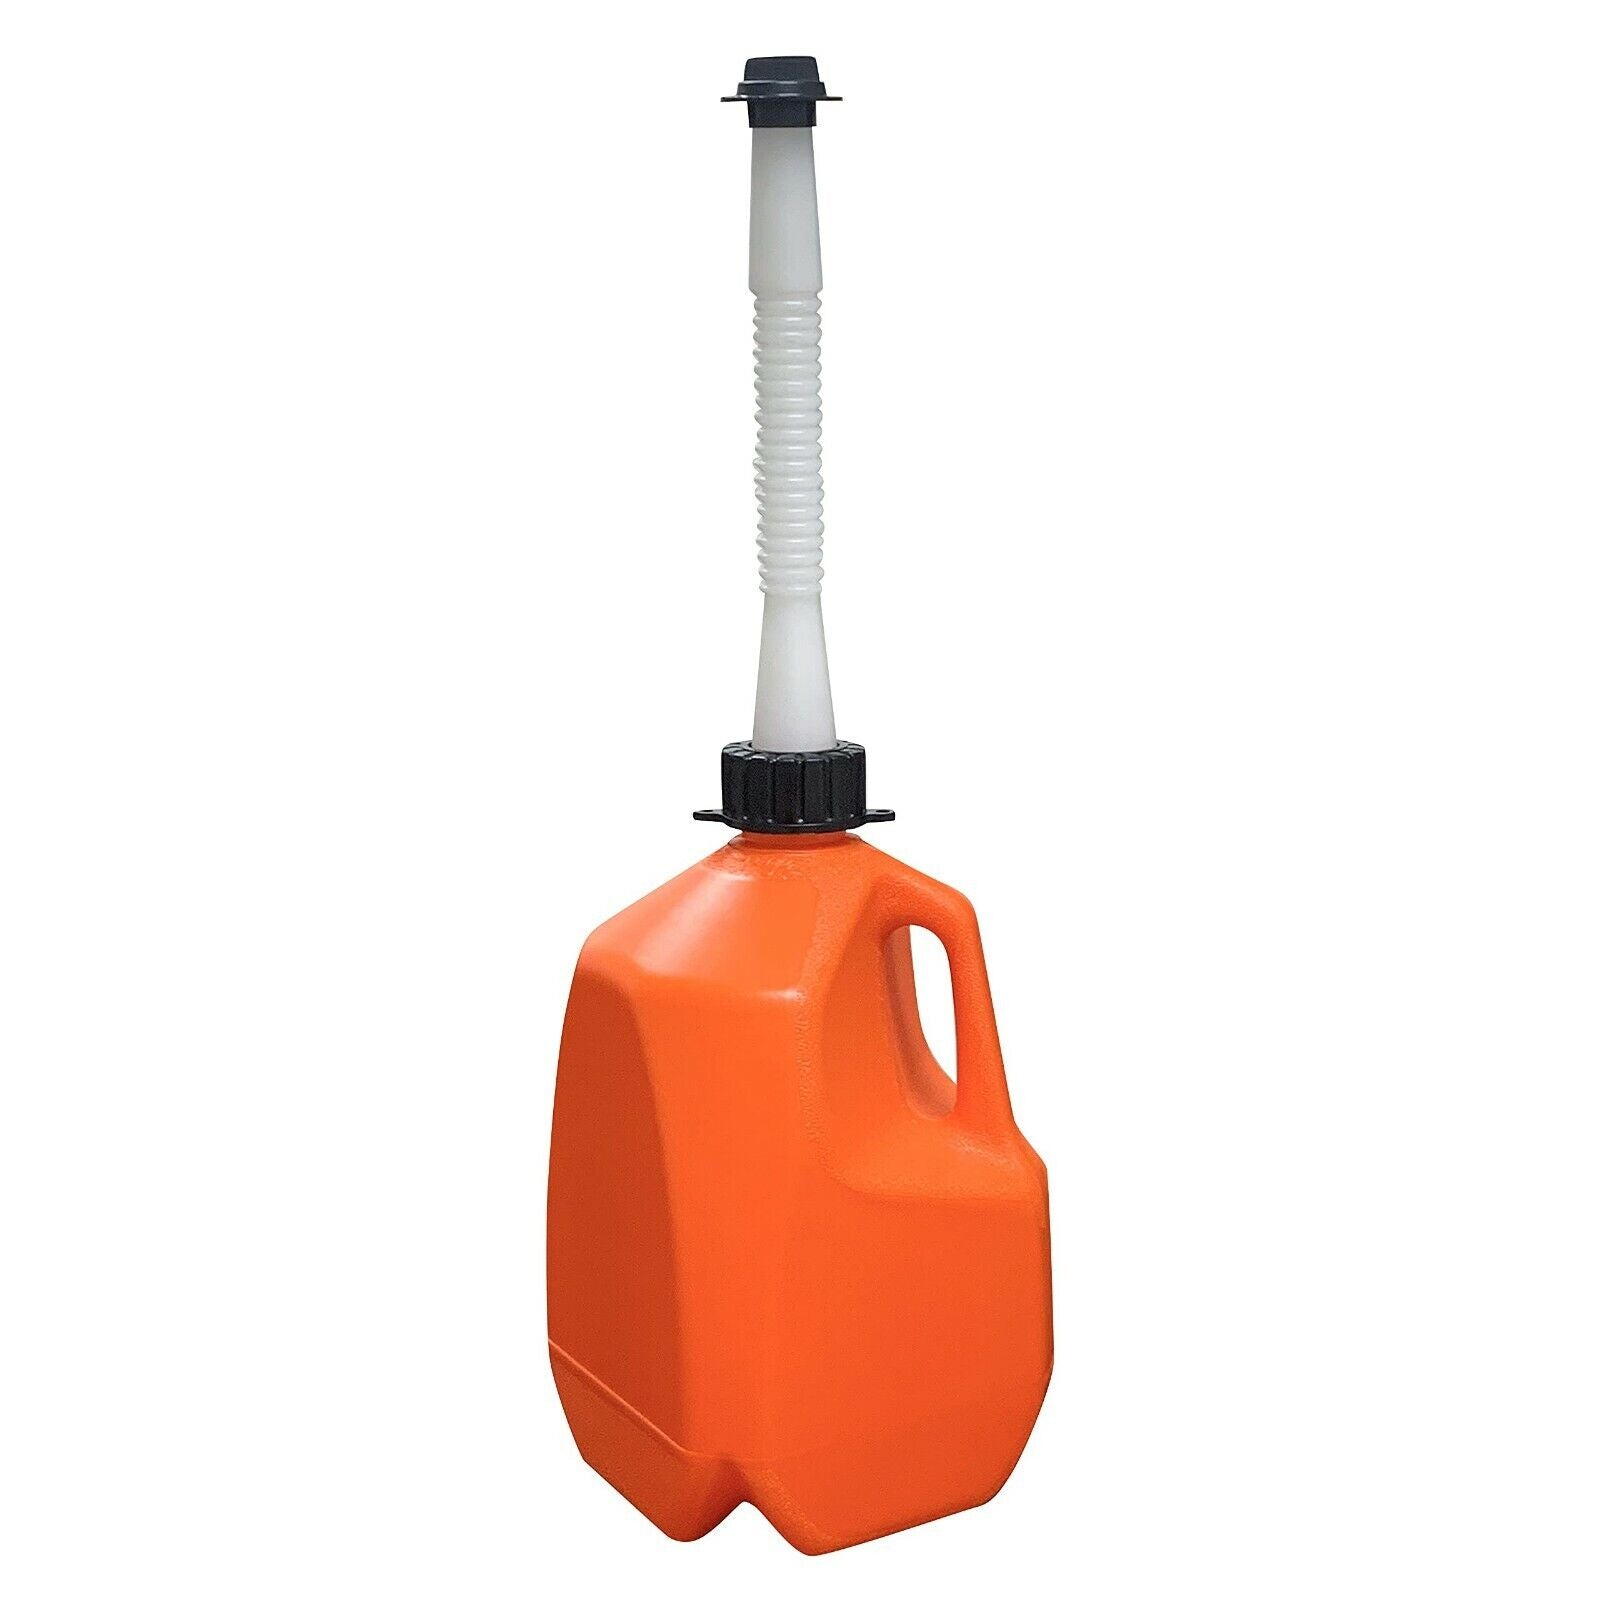 KP KOOL PRODUCTS 1 gallon plastic can - 1 gallon gas jug -  1 gallon gas can in your favorite color of choice. - Kool Products